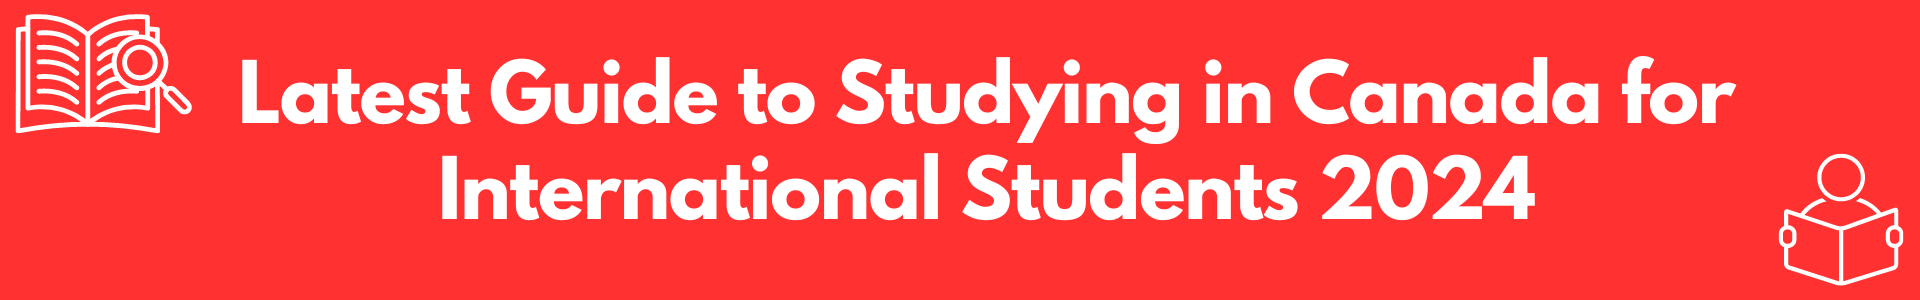 Latest Guide to Studying in Canada for International Students 2024